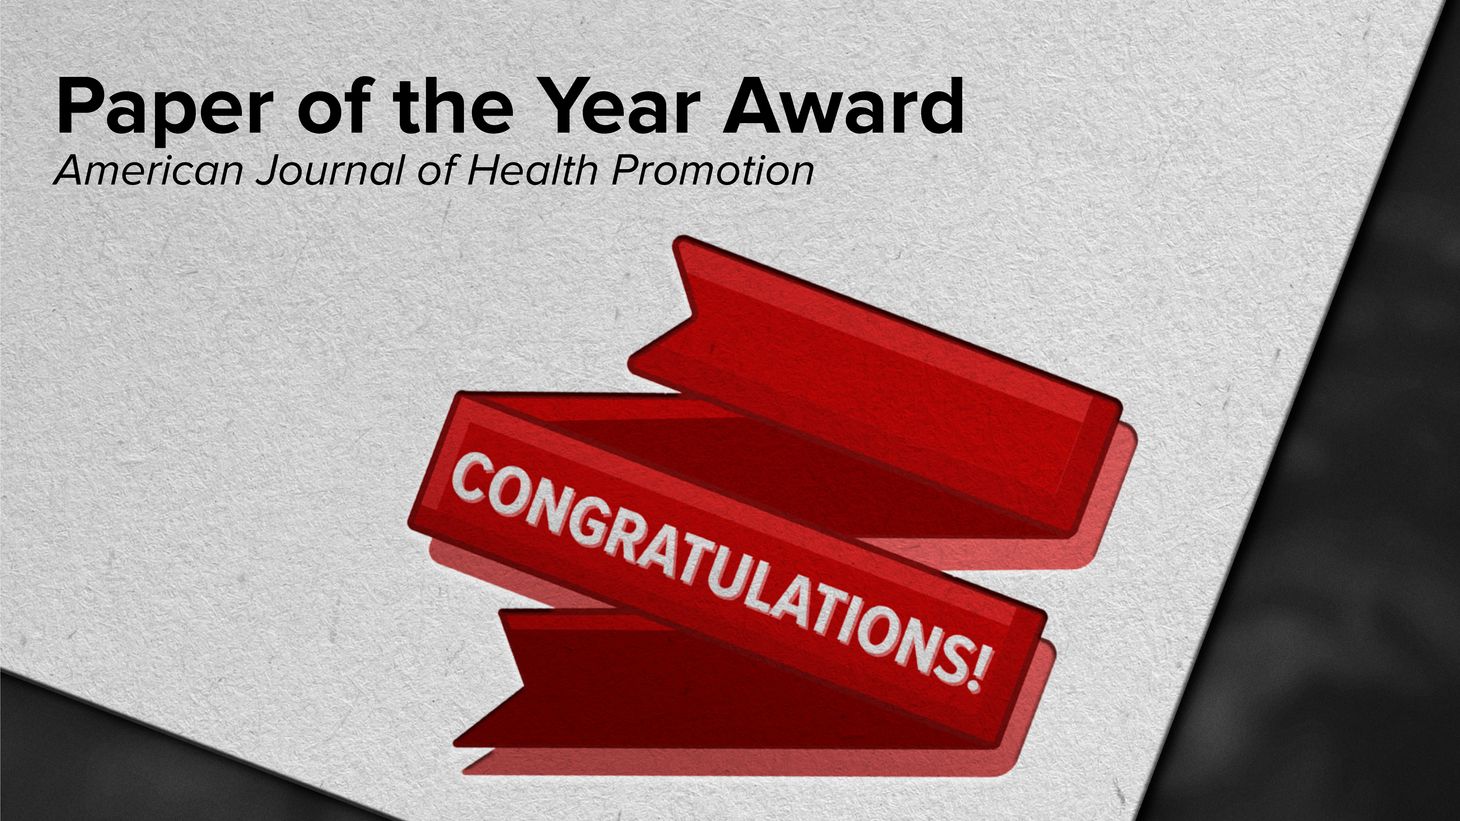 Paper of the Year Award - Congratulations!